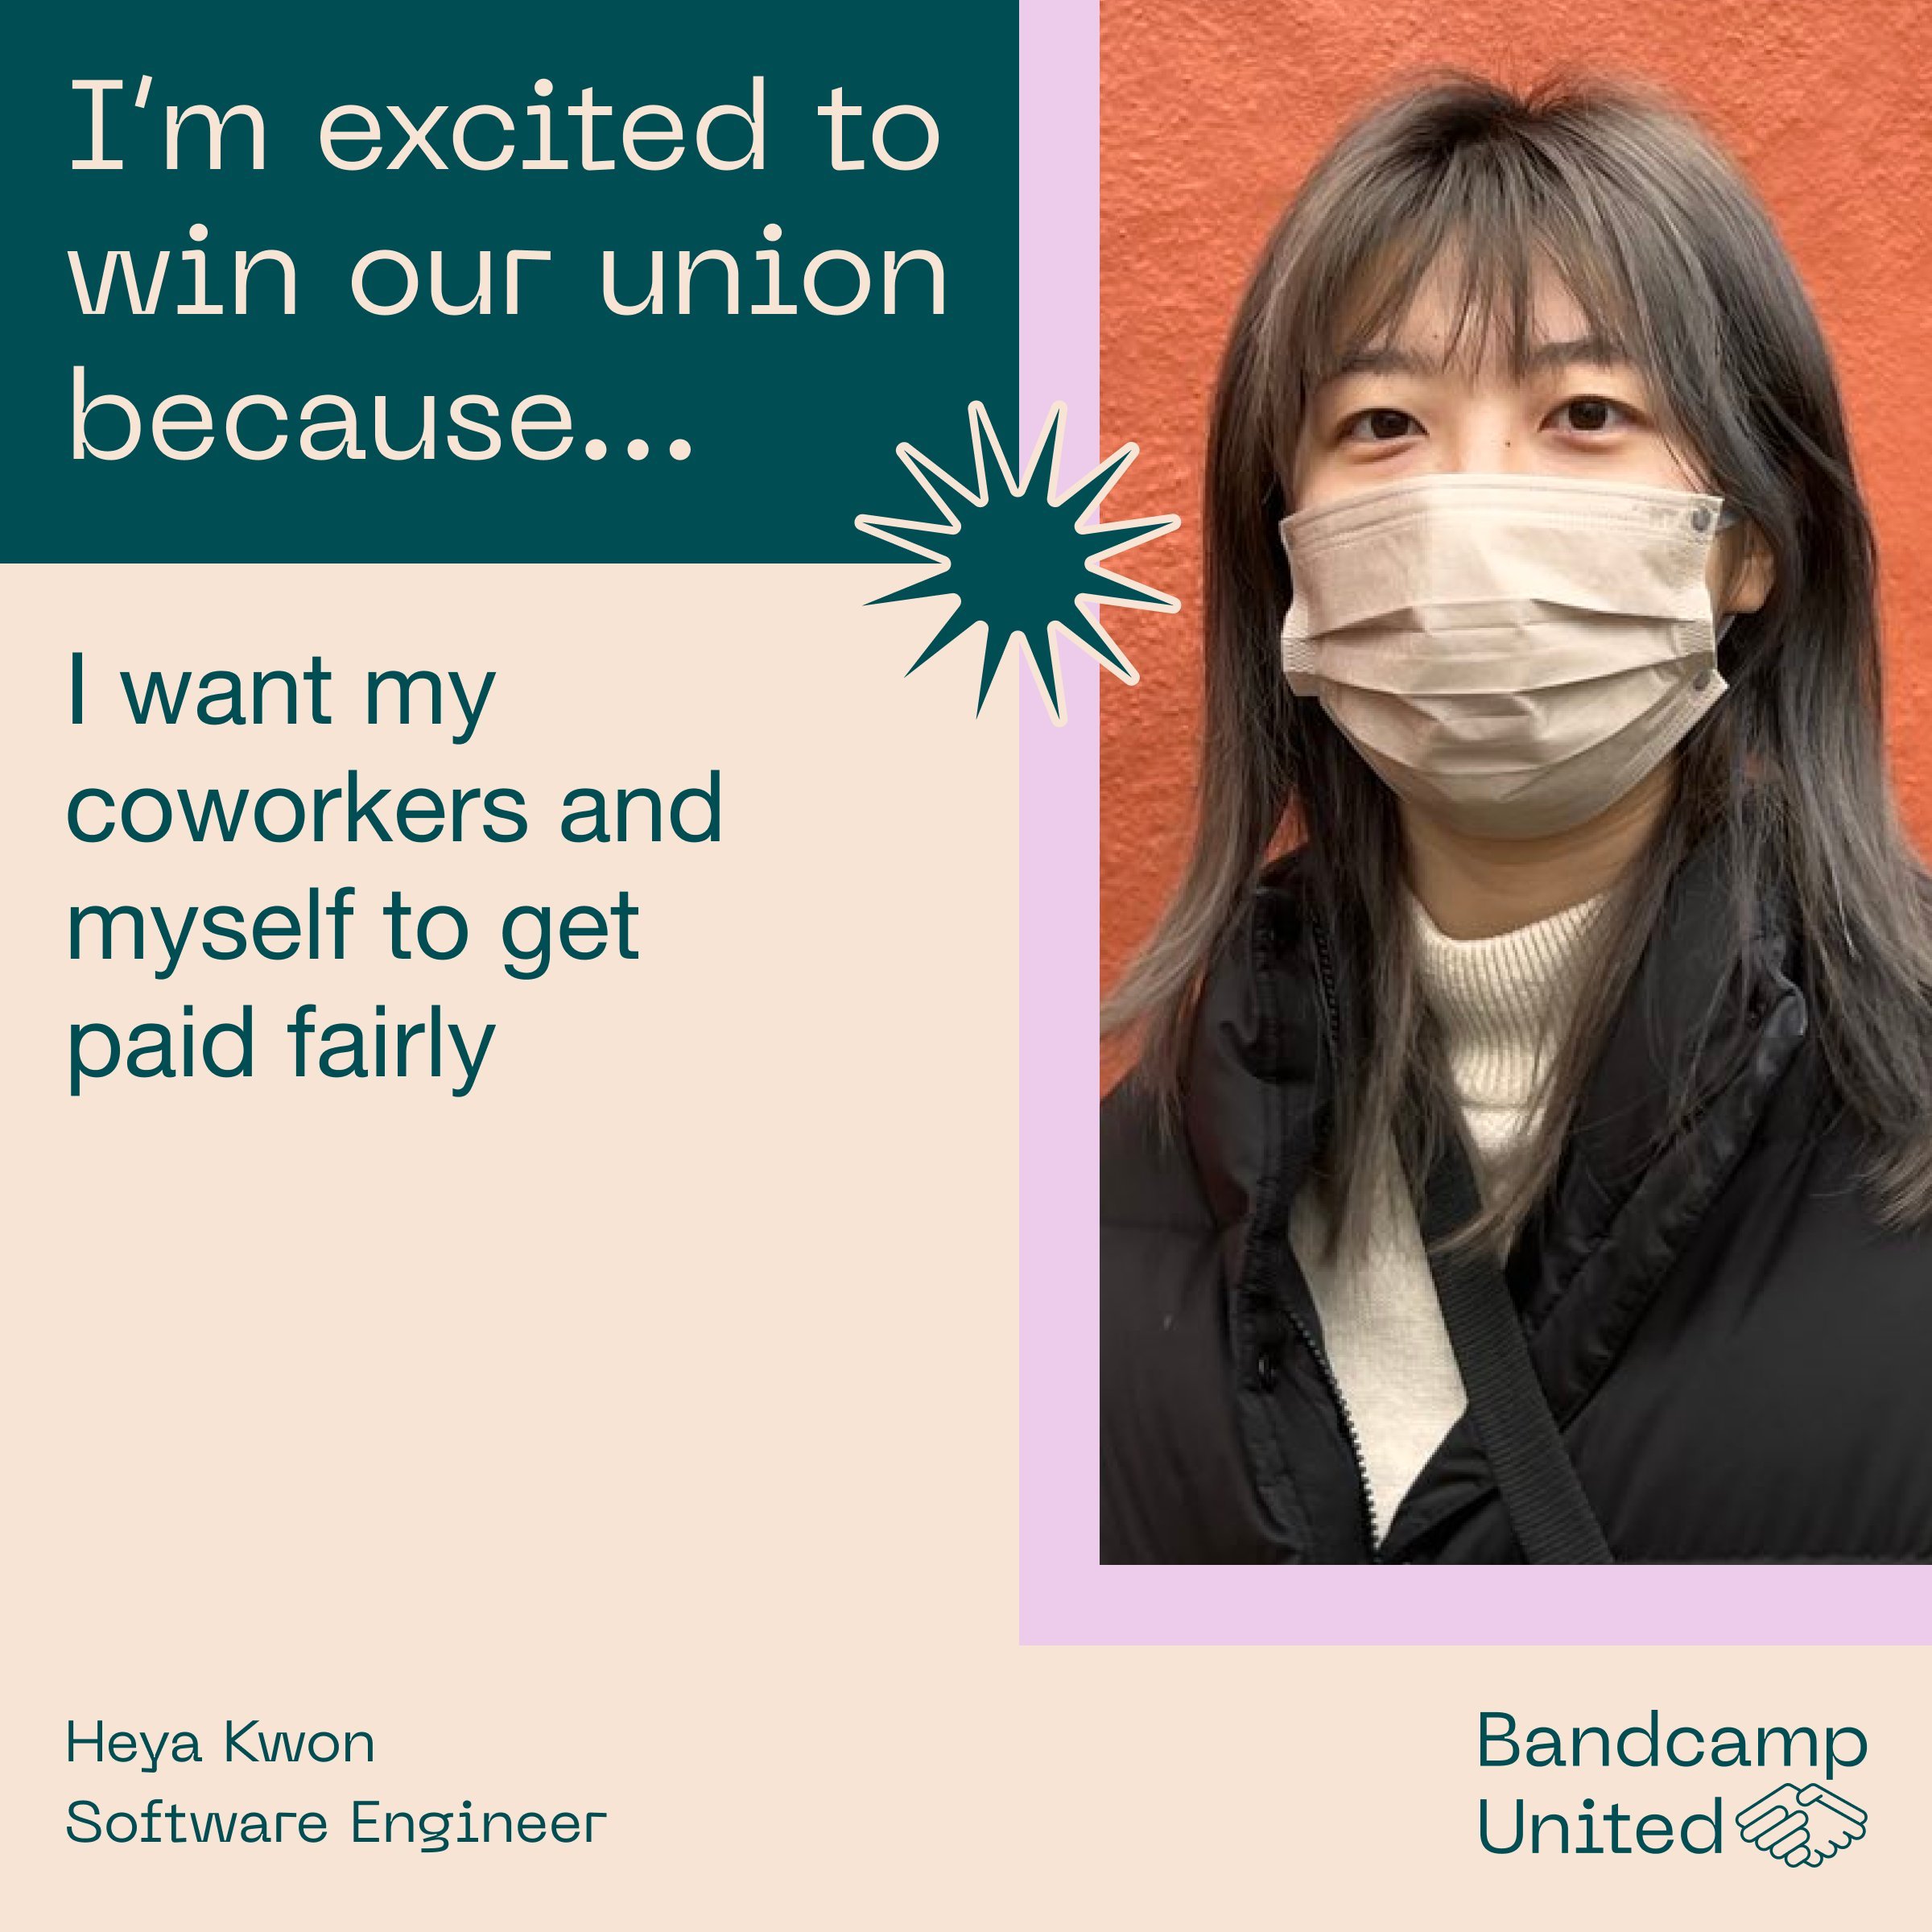 bandcamp united worker quotes 2.jpg